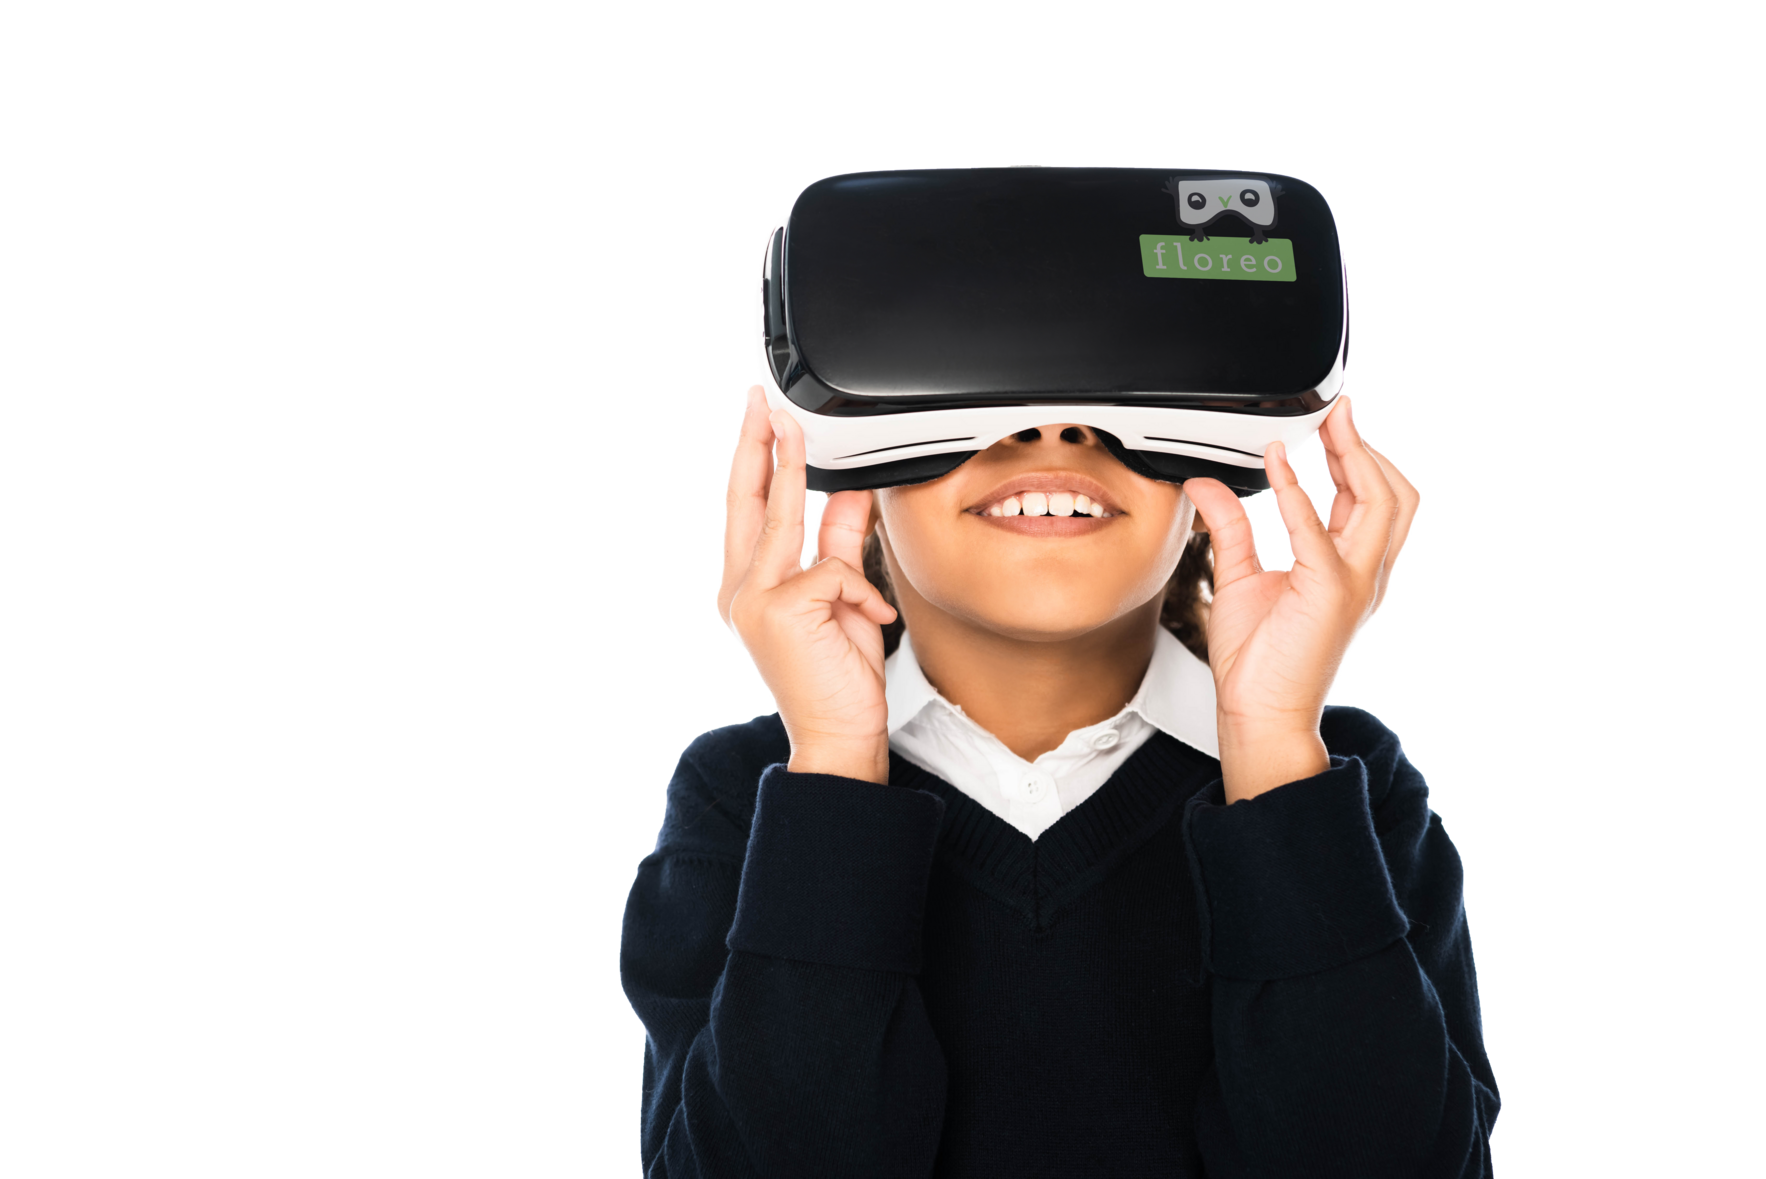 Floreo nabs FDA breakthrough label for its VR software